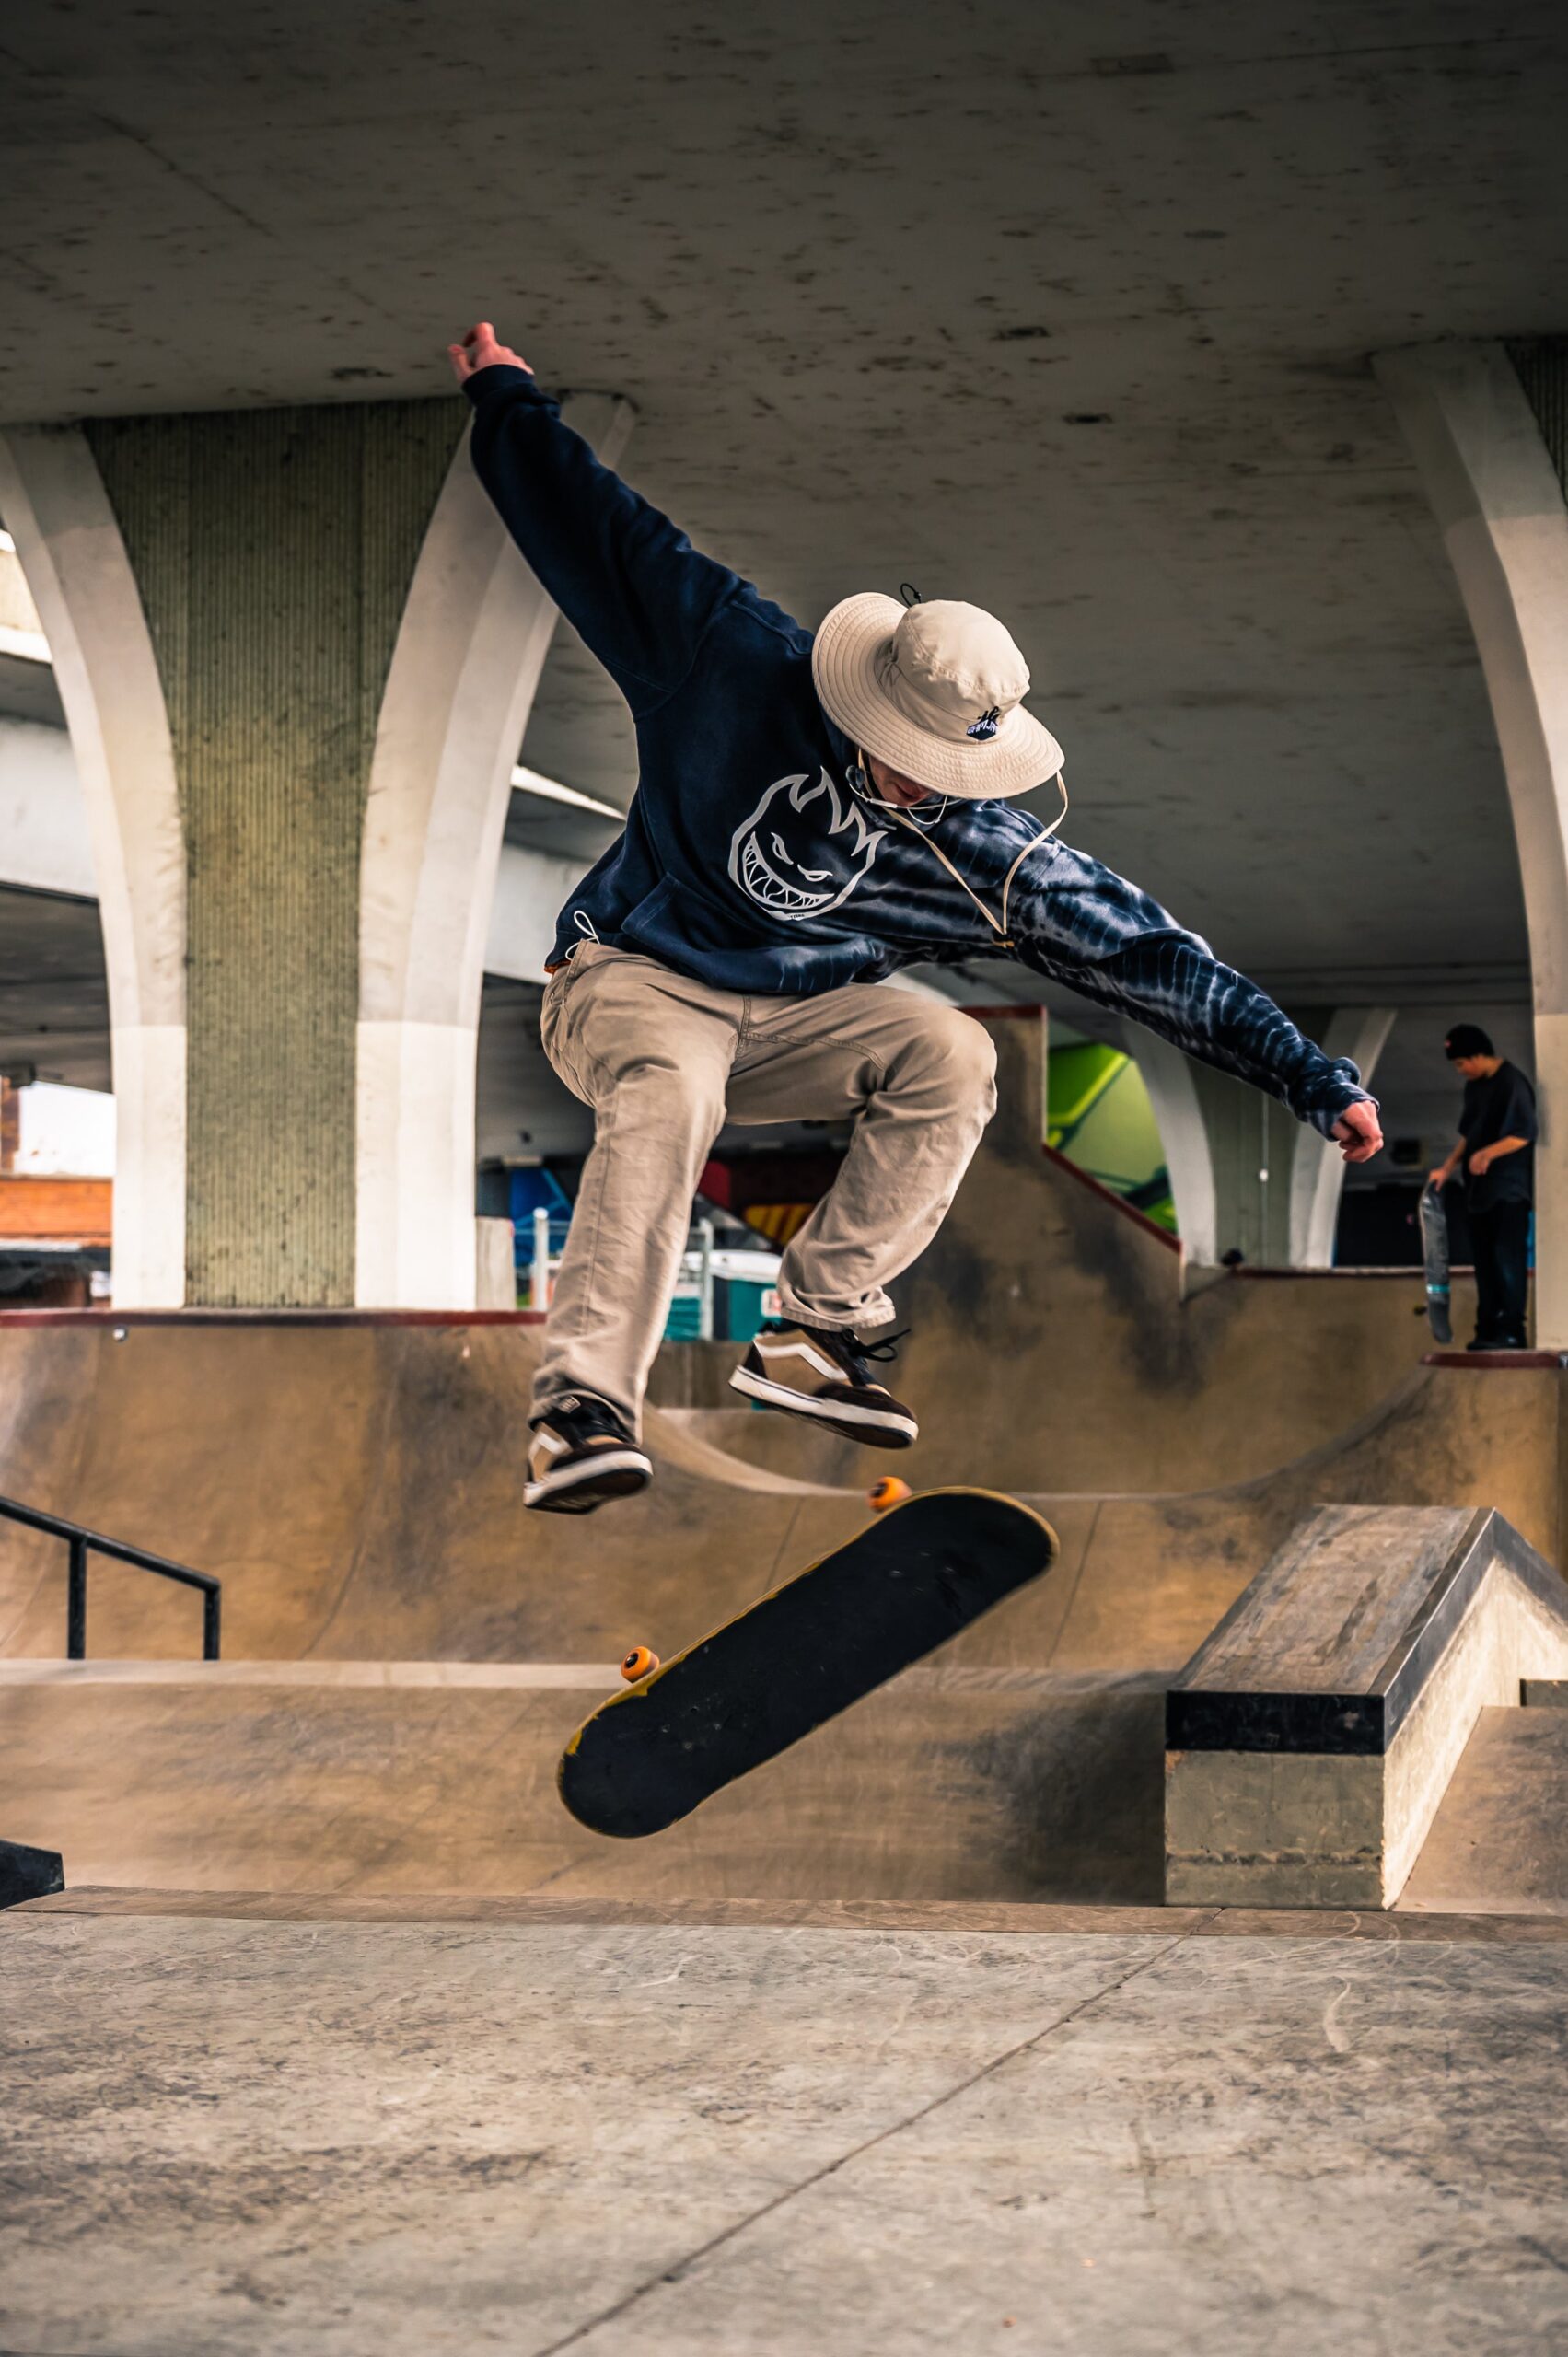 Whats The Secret To Mastering Skateboard Big Spins?